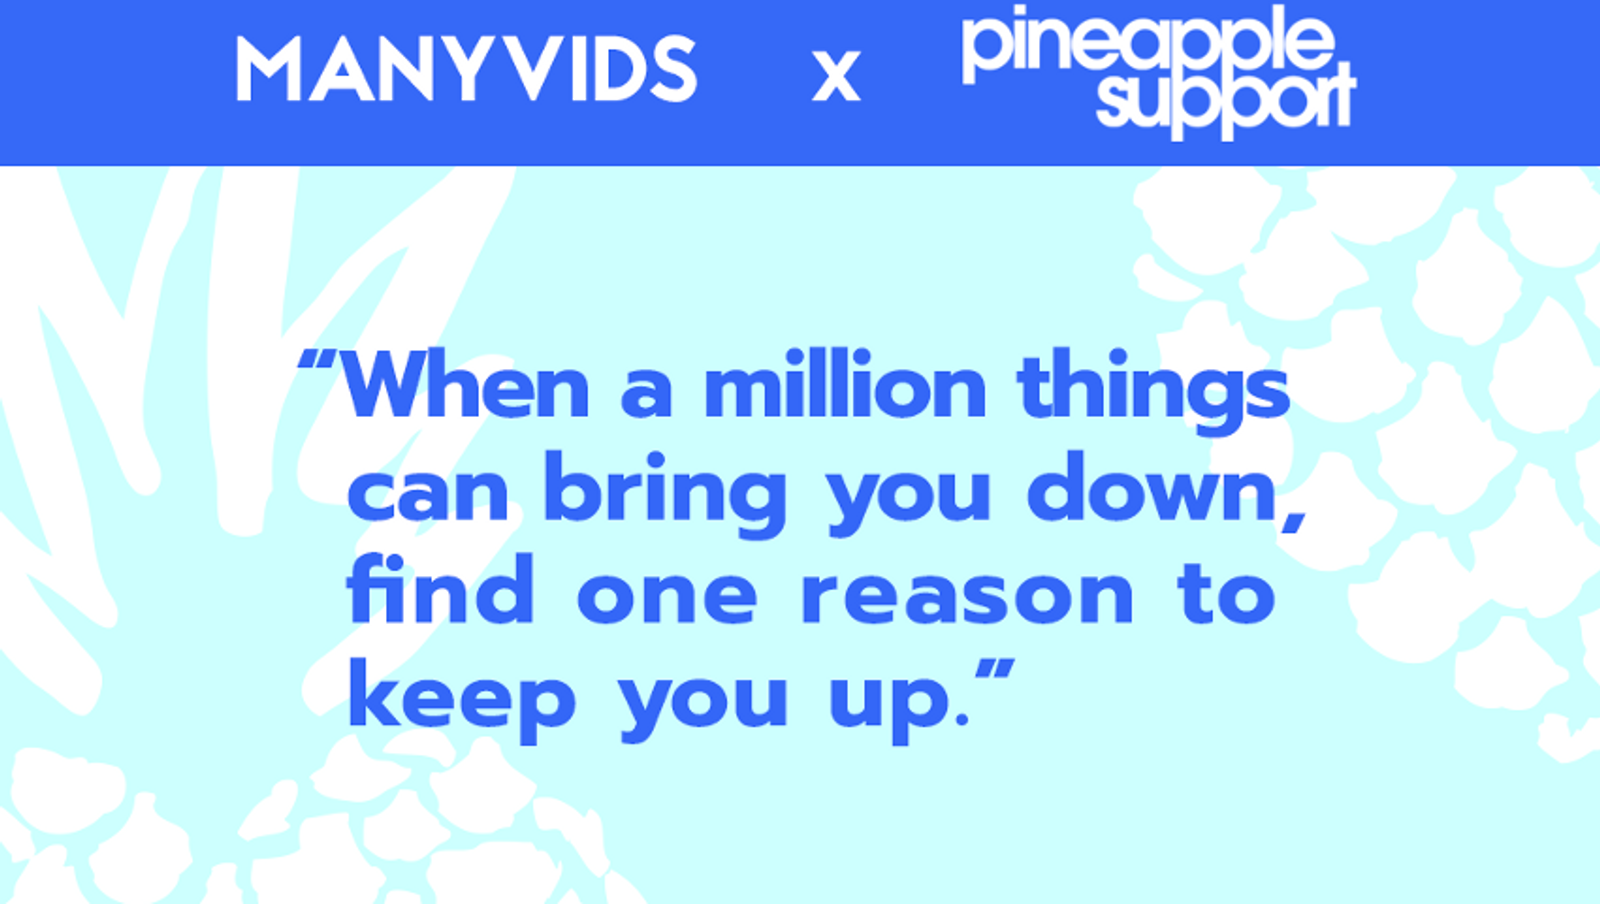 ManyVids Aligns With Pineapple Support, Pledges $10K